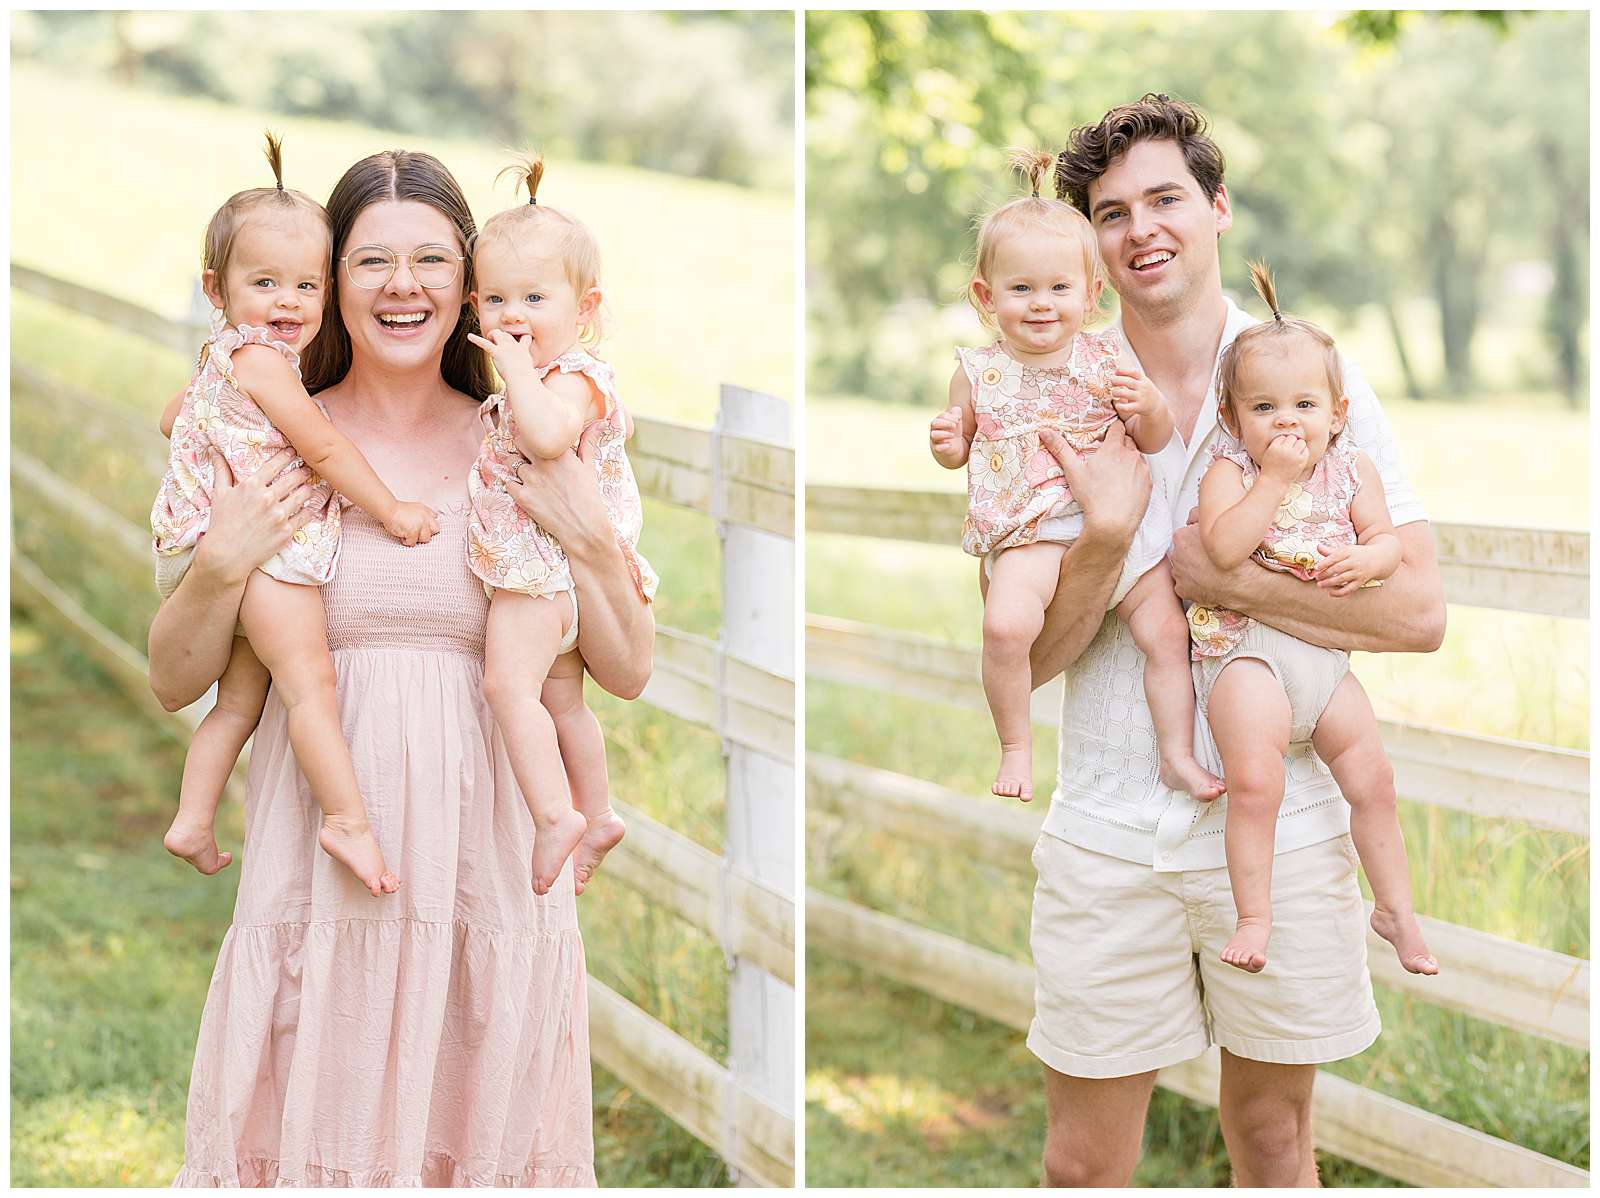 Photo session with twin 1 year old girls during their Nashville family portraits show one image with mom and her holding her daughters close to her cheeks and smiling at the camera wearing coordinating outfits in blush and muted pink tones. The other image shows Dad holding his twin girls and they all look at the camera of Rebecca Rice Photography! Click to see more from this session on the blog today! -rebeccaricephoto.com